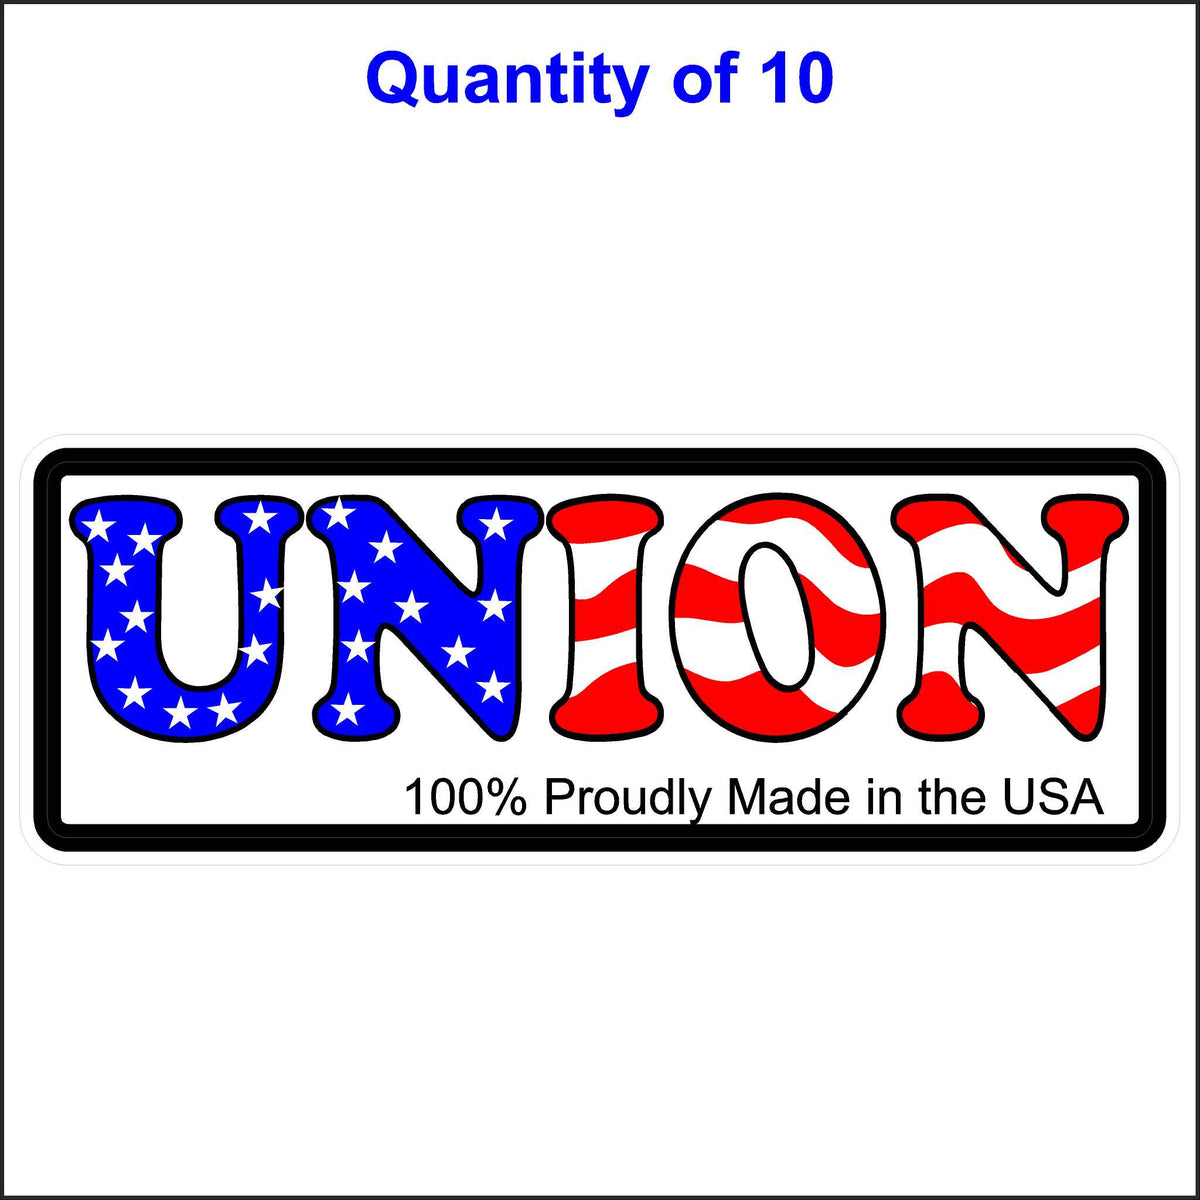 Union Proudly Made in the USA Stickers. 10 Quantity.